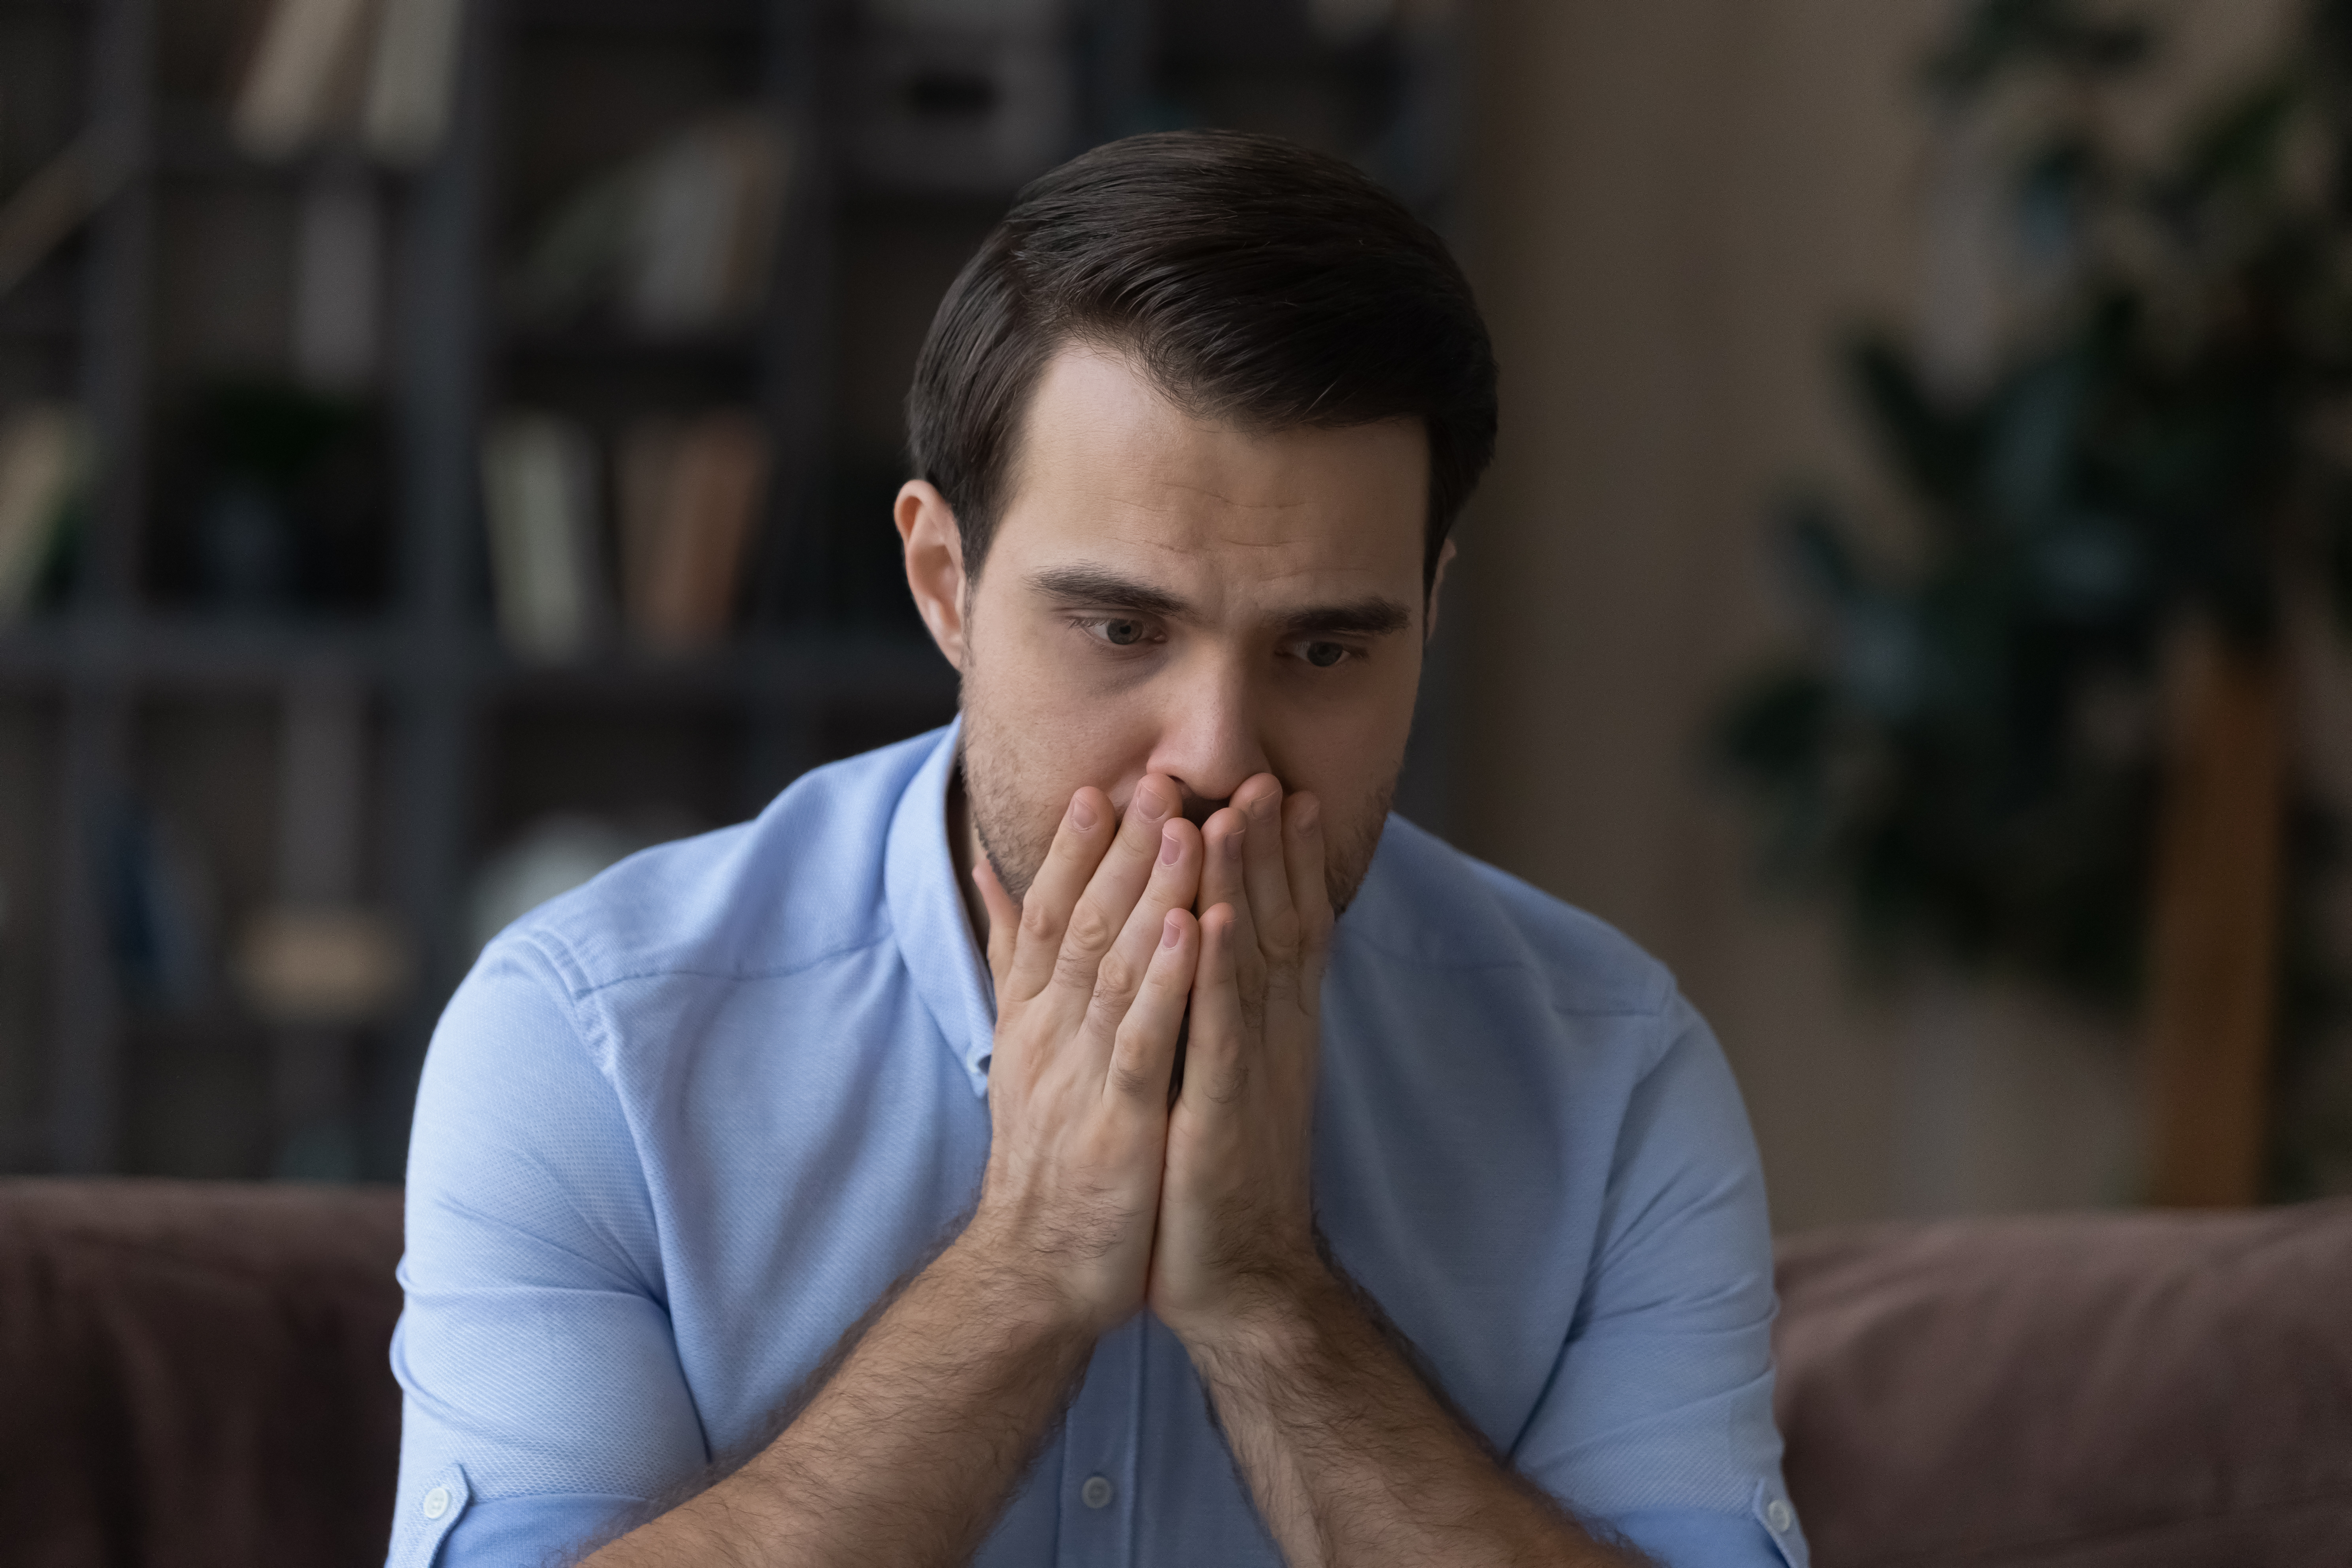 A man sitting with his hands on his mouth | Source: Pexels